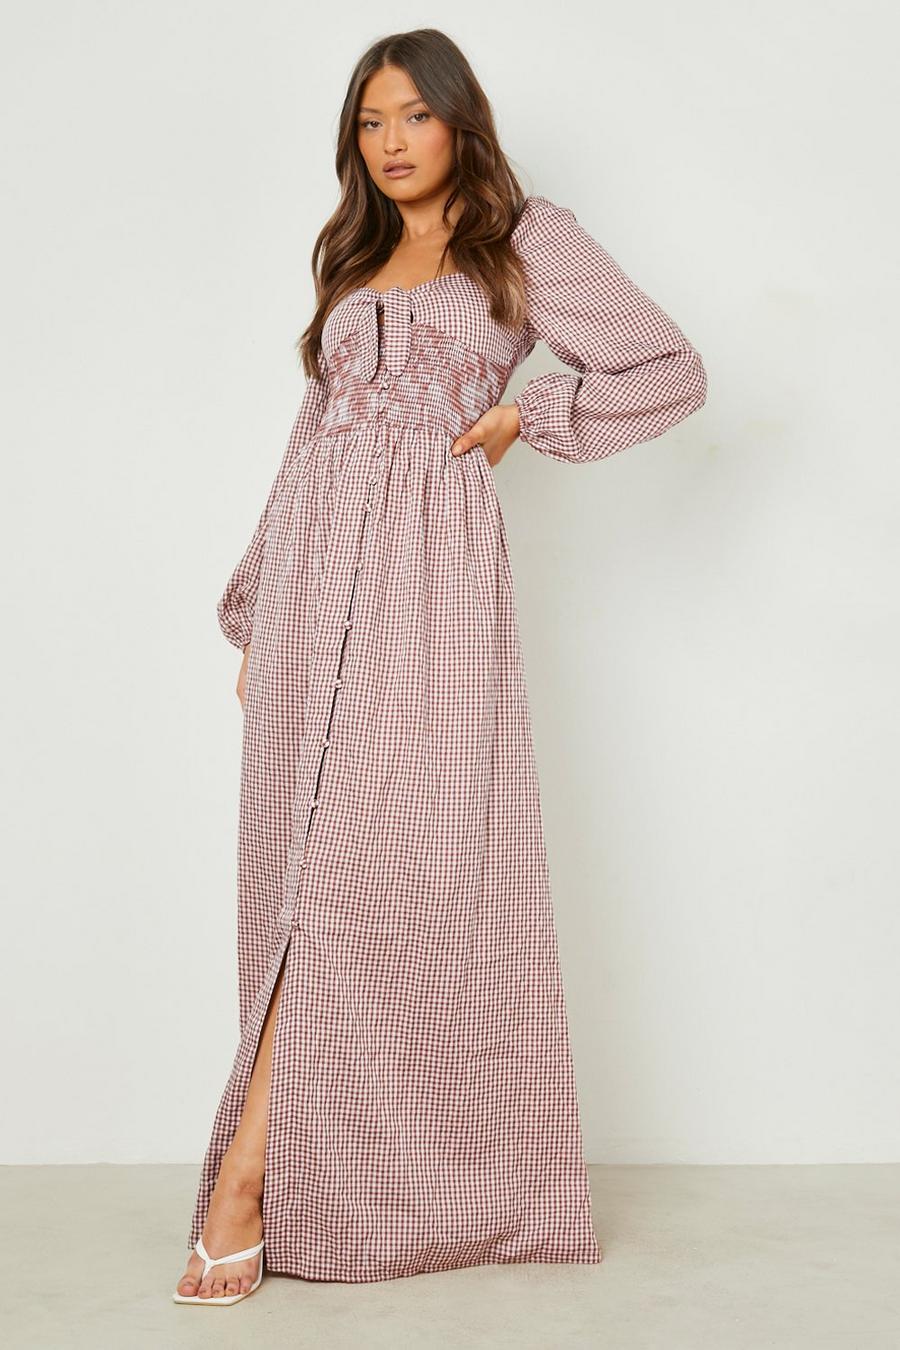 Chocolate brown Bow Front Maxi Dress Gingham Print